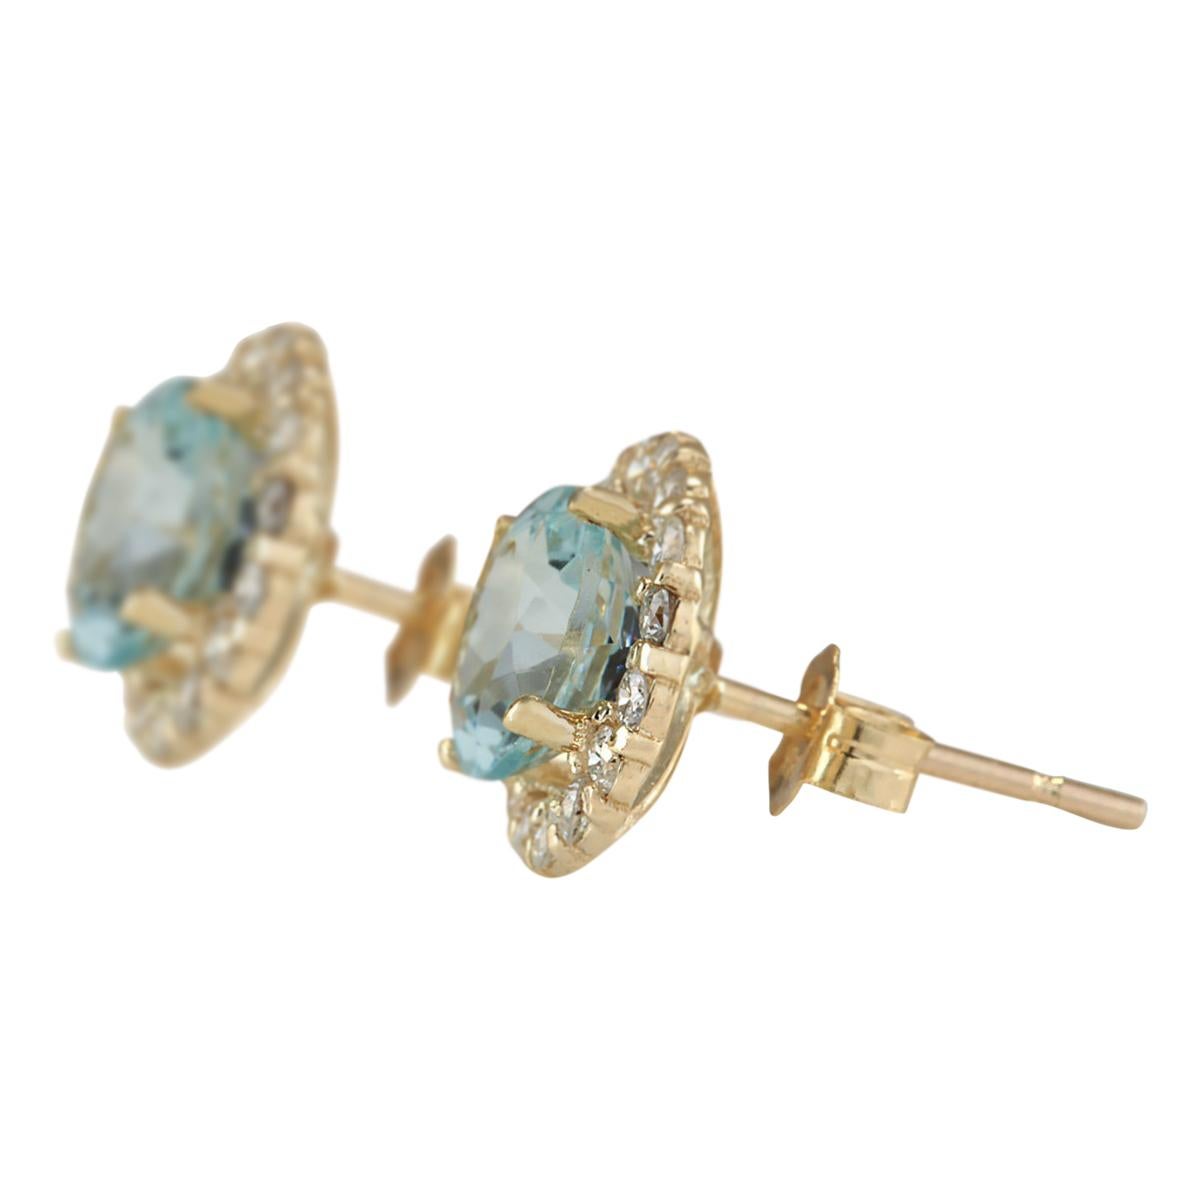 Stamped: 14K Yellow Gold
Total Earrings Weight: 2.0 Grams
Total Natural Aquamarine Weight is 3.00 Carat (Measures: 7.00x7.00 mm)
Color: Blue
Total Natural Diamond Weight is 0.65 Carat
Color: F-G, Clarity: VS2-SI1
Face Measures: 10.65x10.65 mm
Sku: